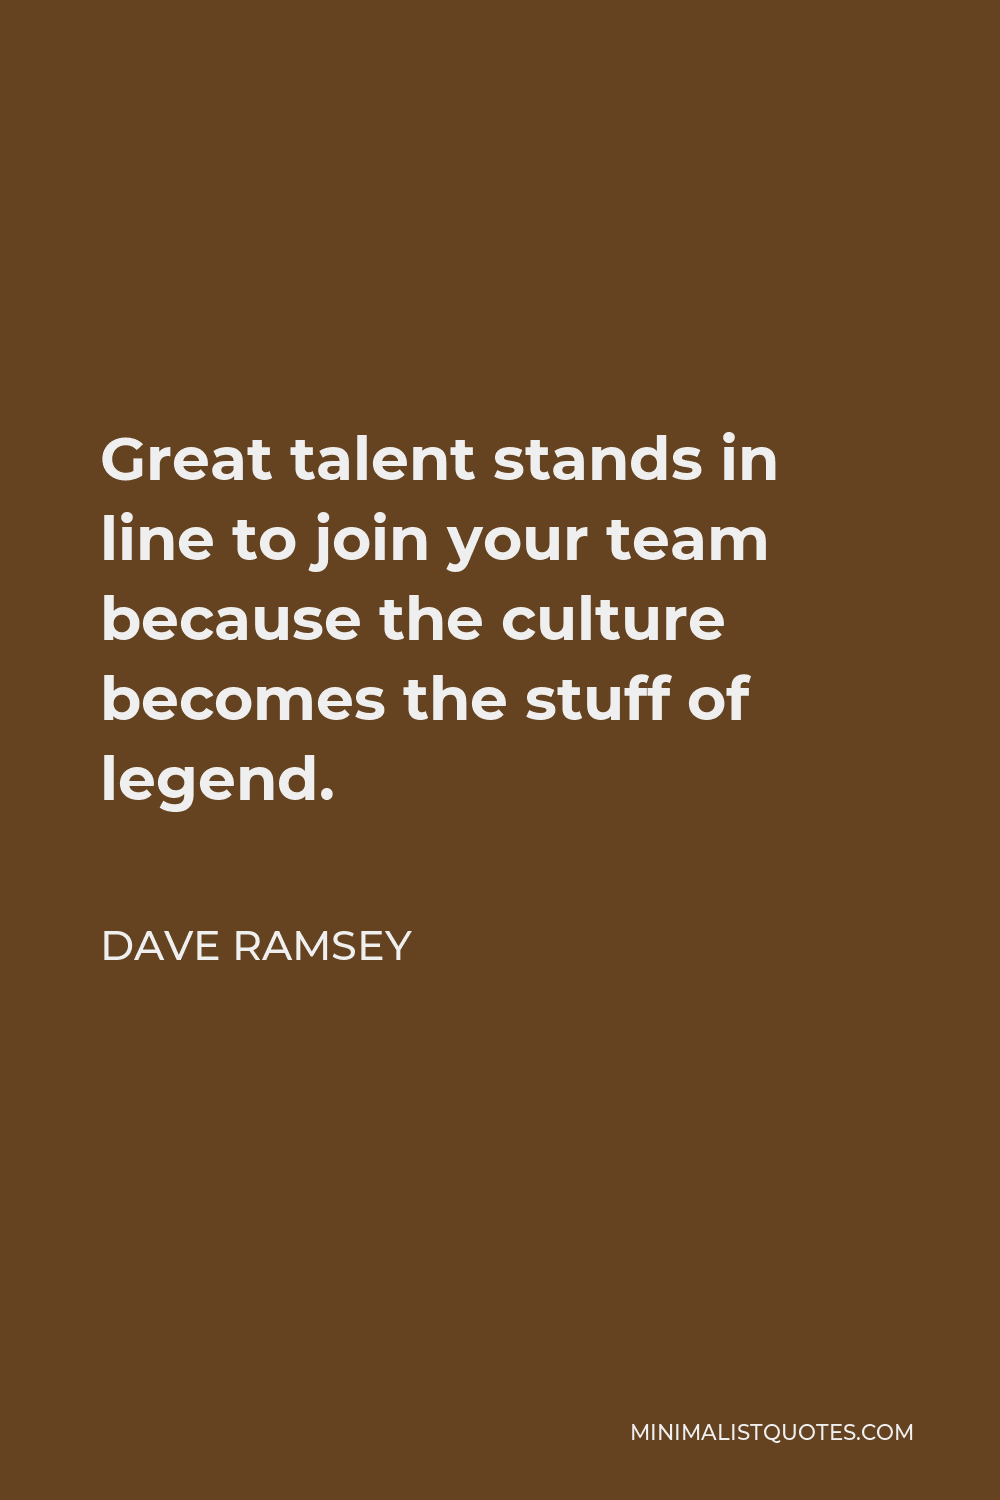 Dave Ramsey Quote - Great talent stands in line to join your team because the culture becomes the stuff of legend.